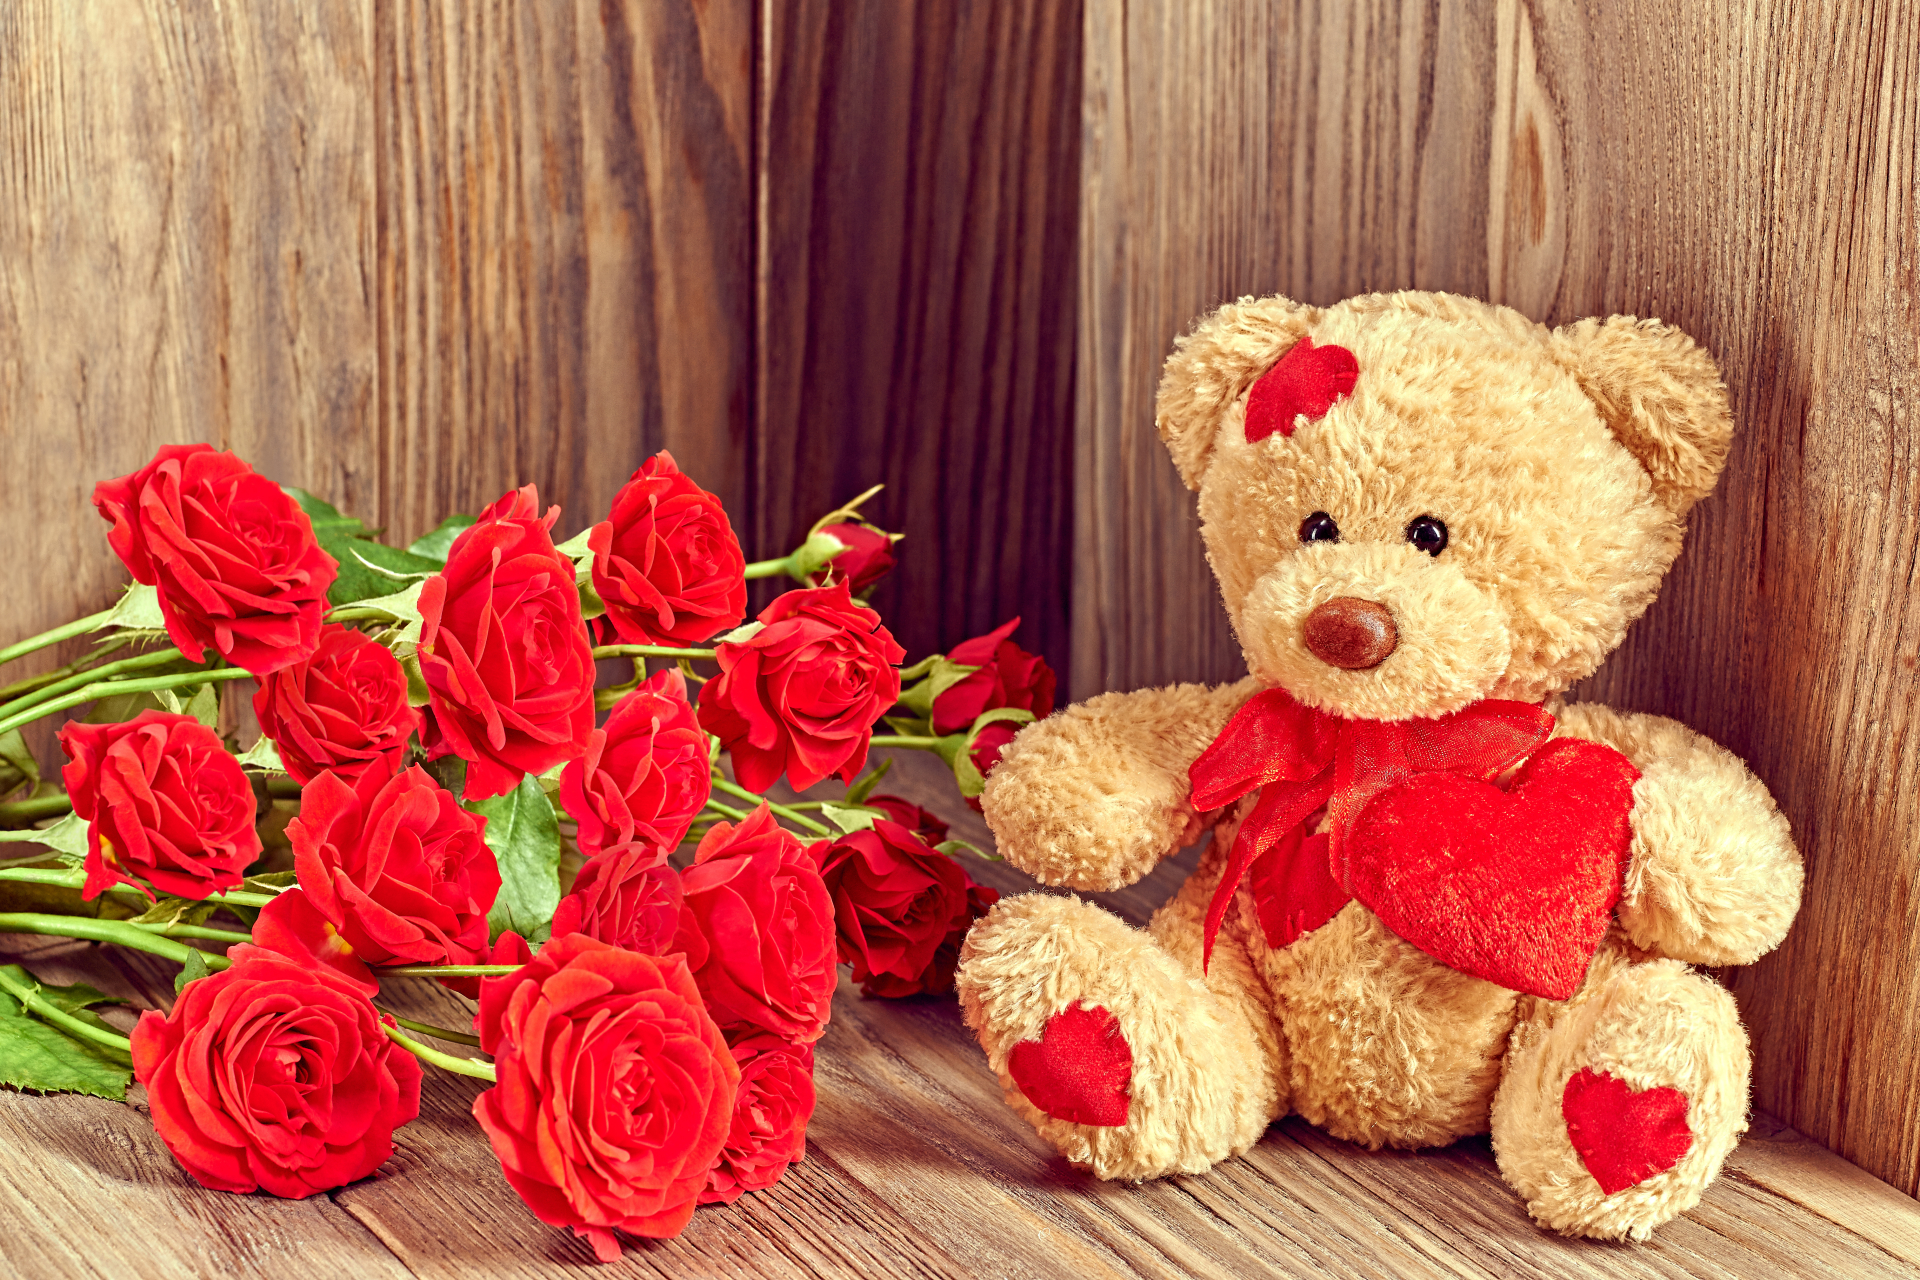 Red Roses Cute Teddy Bear Picture Background Wallpaper - Cutest Wallpaper Of Teddy Bear - HD Wallpaper 